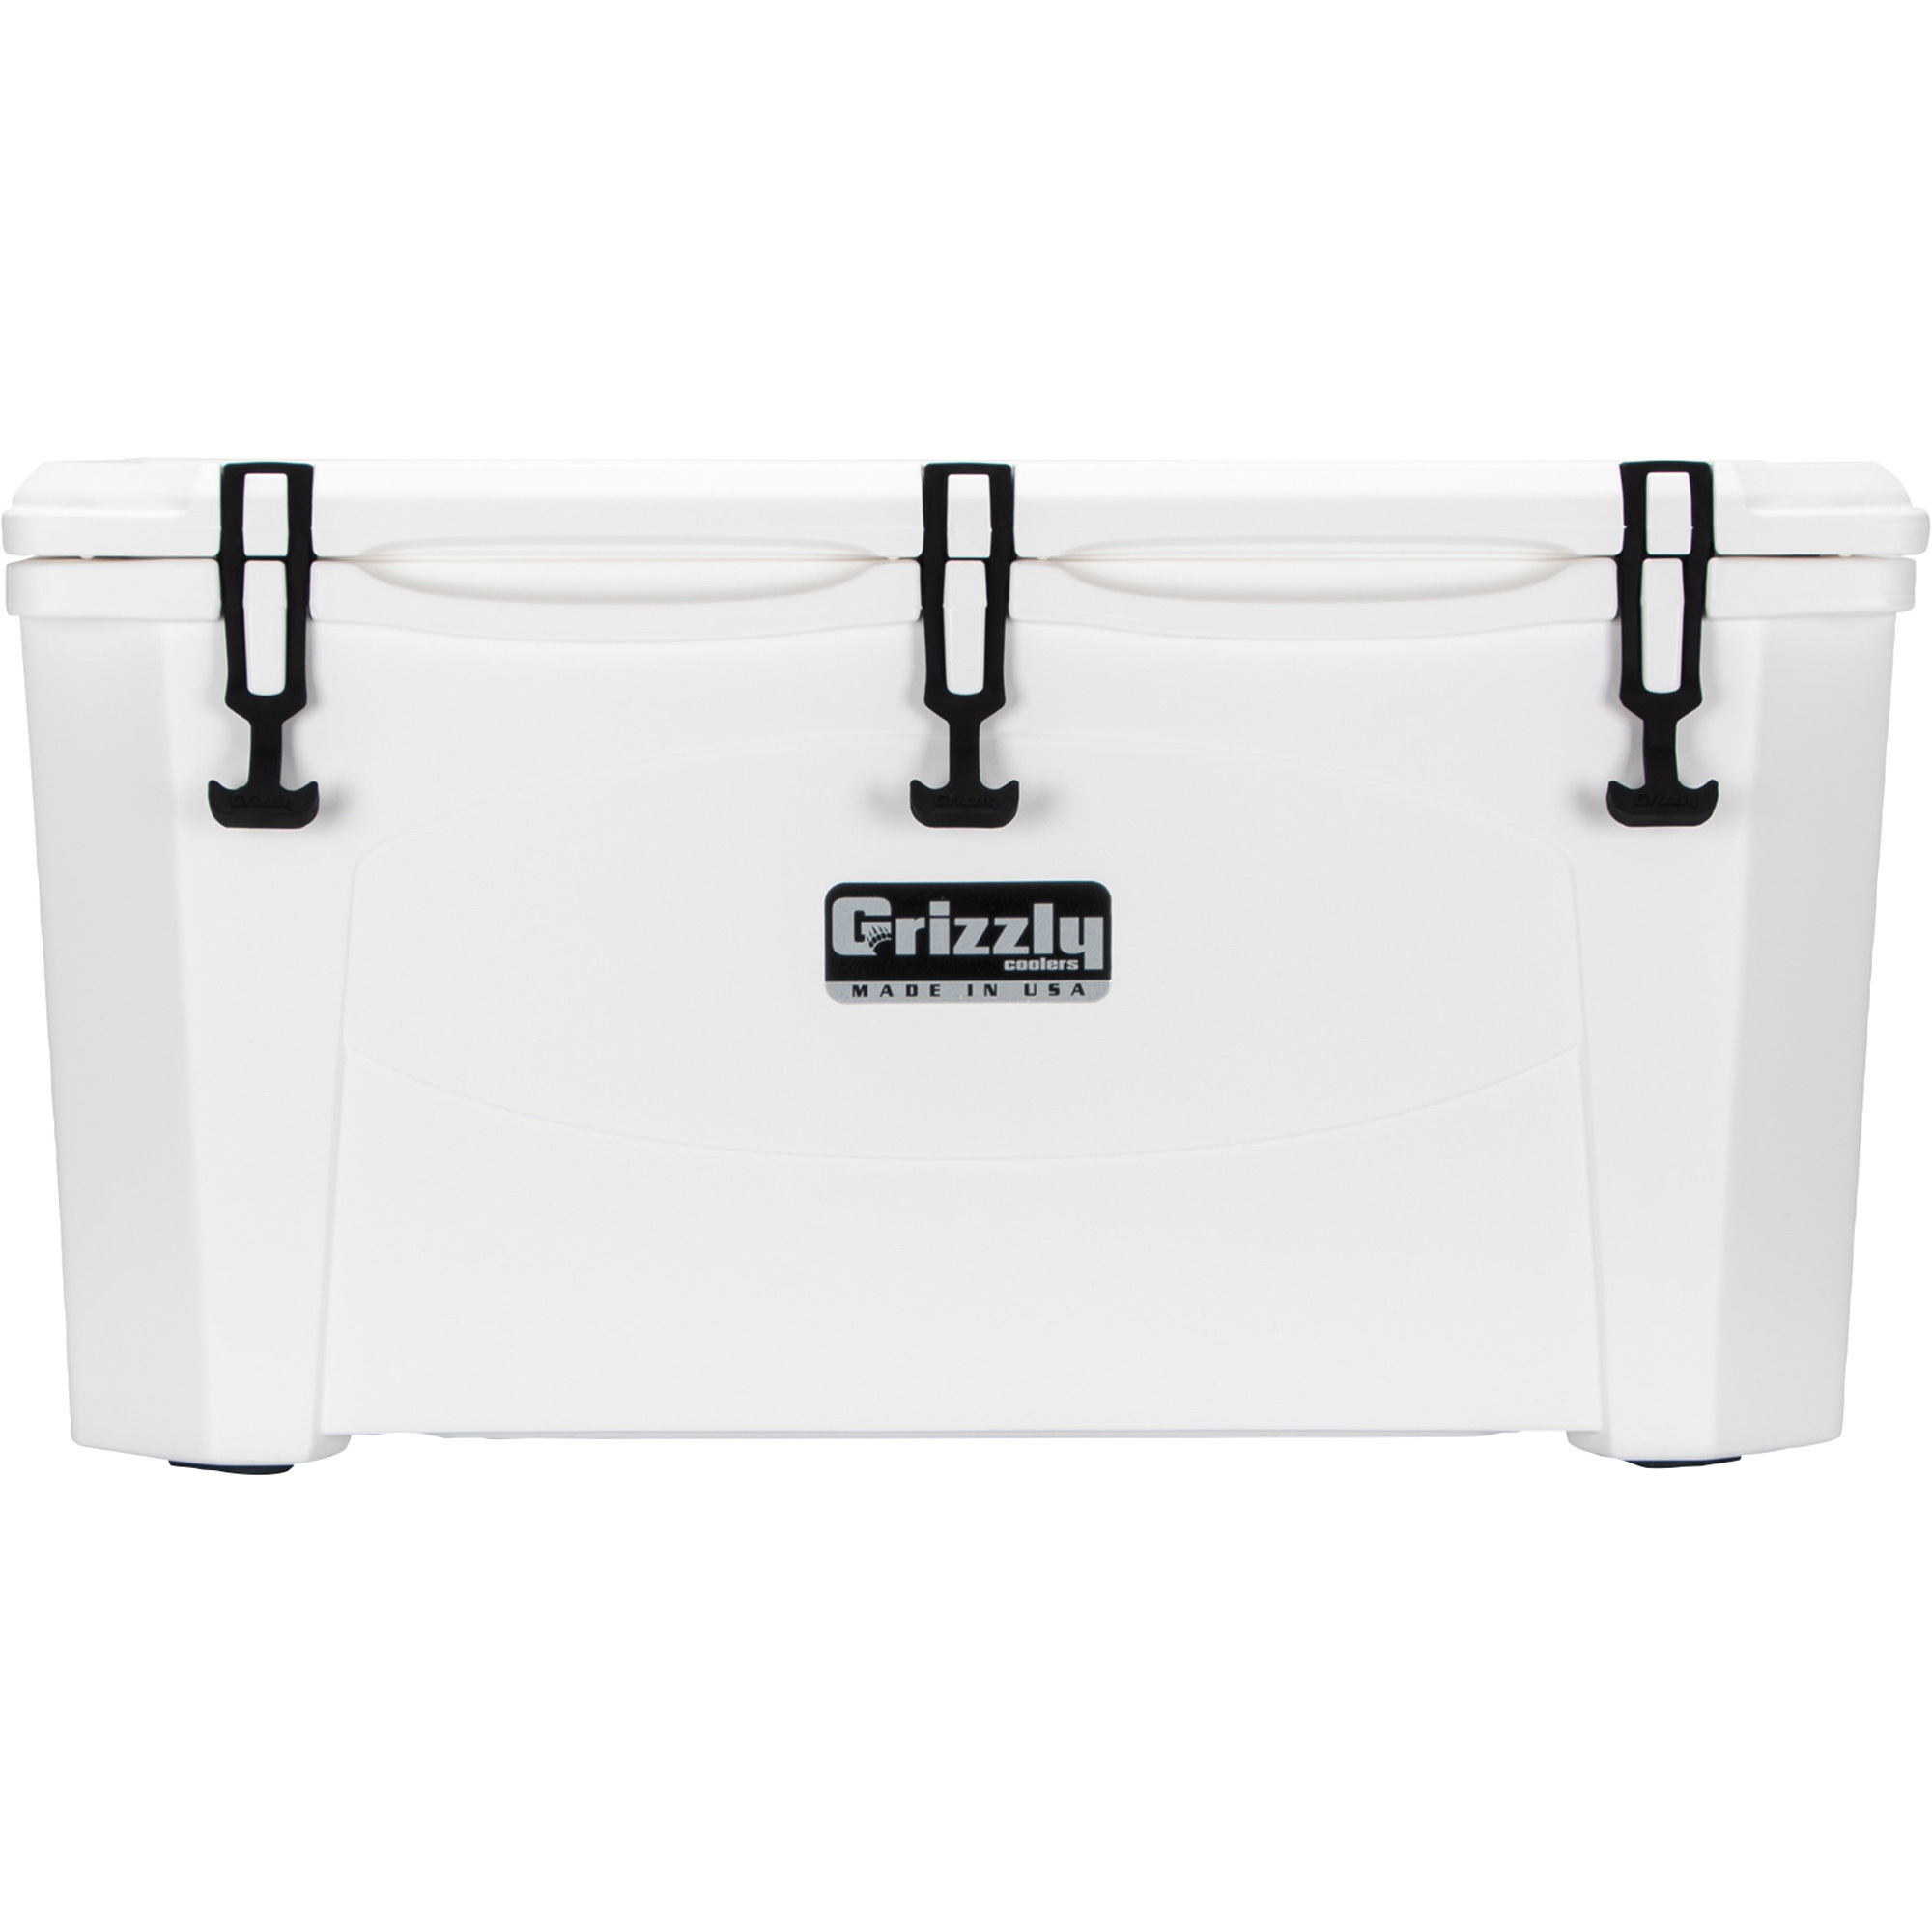 Grizzly Cooler 75-qt. White, Model G-75